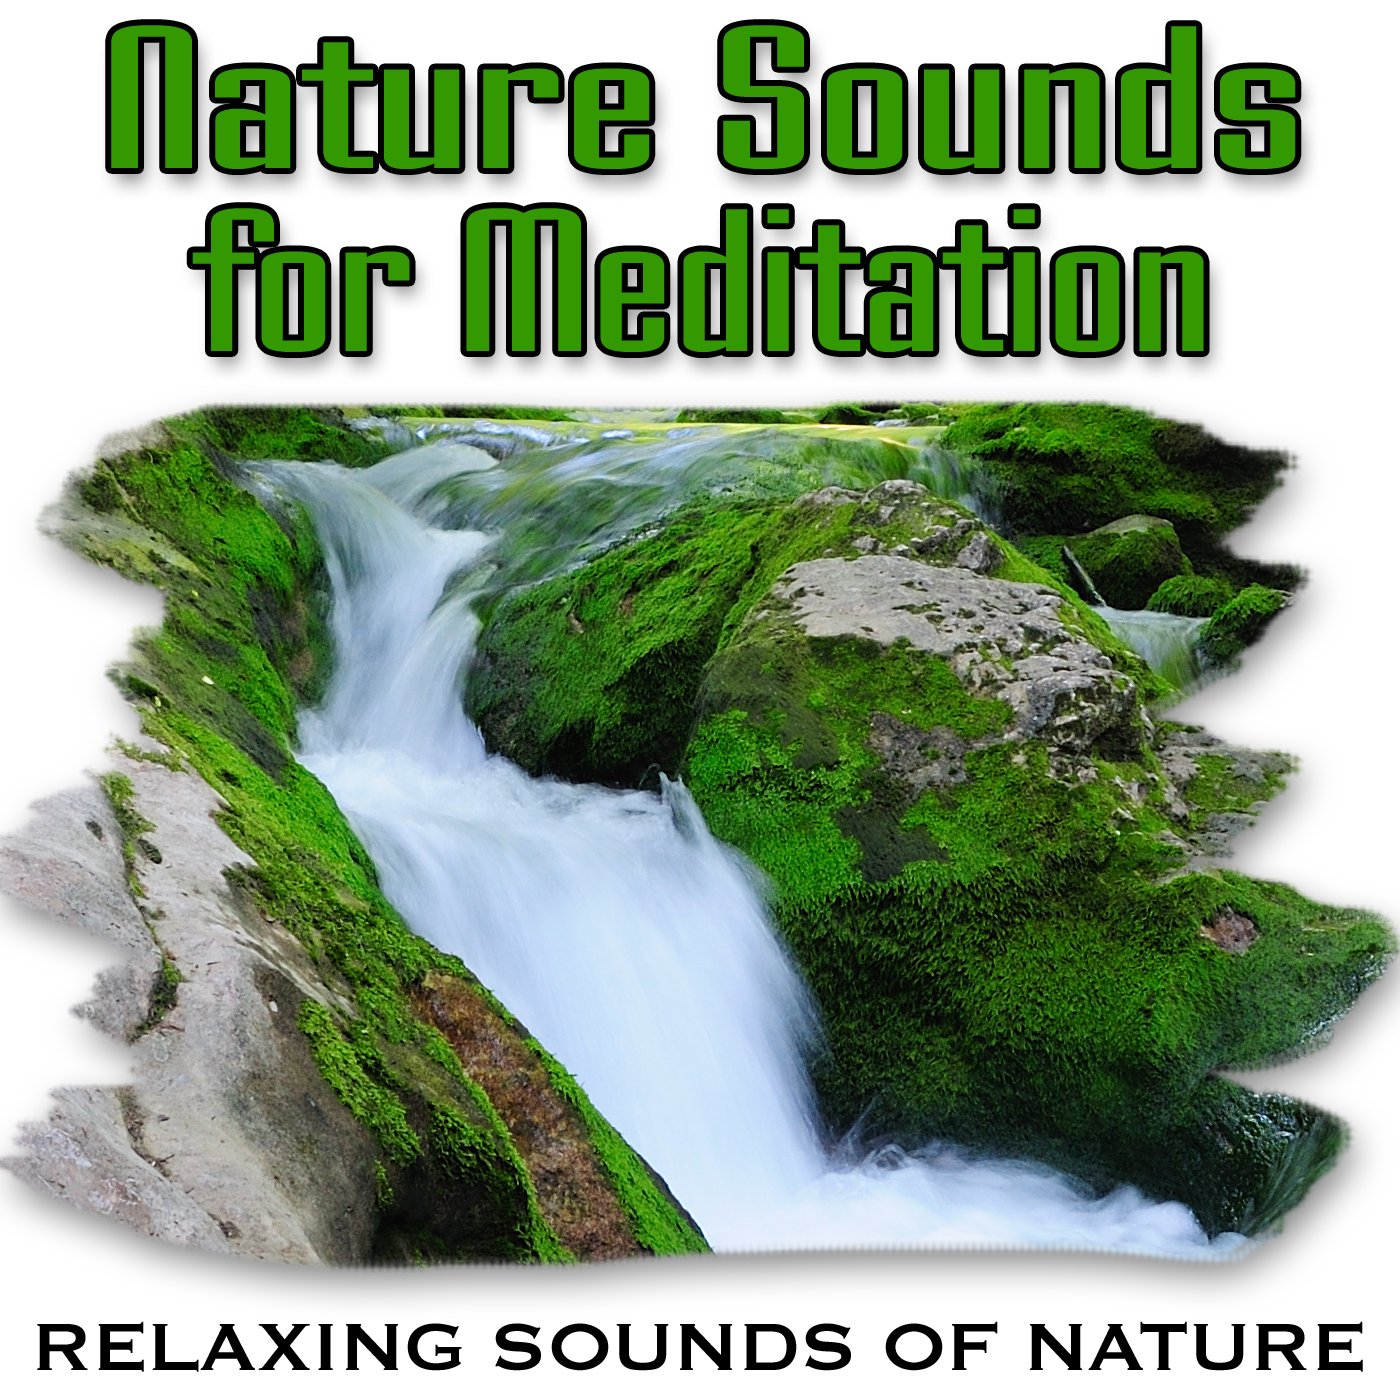 Natural last. Sounds of nature.